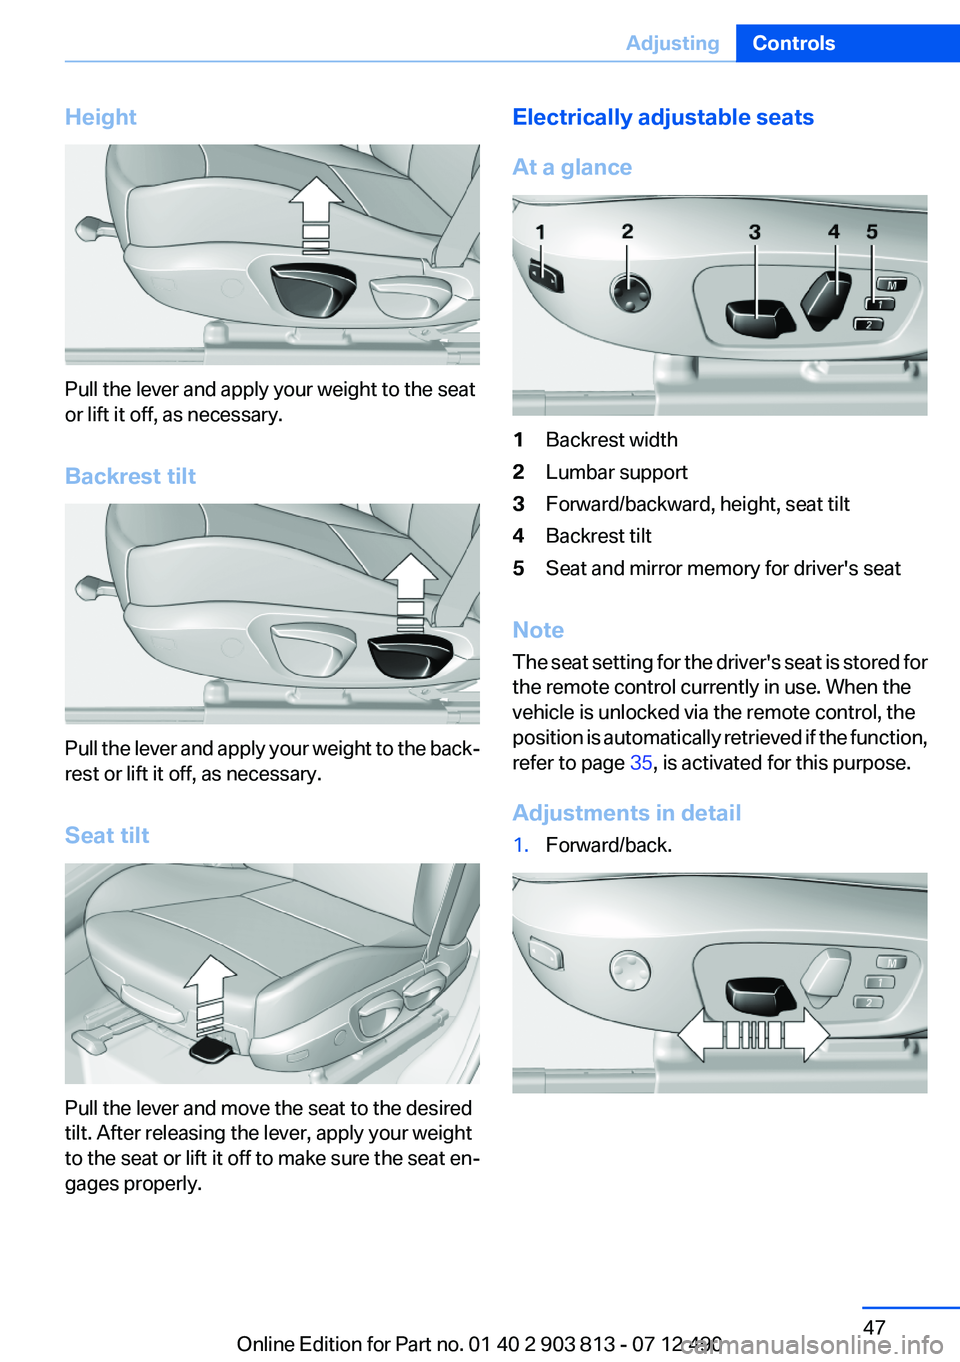 BMW X3 XDRIVE 35I 2013 Service Manual Height
Pull the lever and apply your weight to the seat
or lift it off, as necessary.
Backrest tilt
Pull the lever and apply your weight to the back‐
rest or lift it off, as necessary.
Seat tilt
Pul